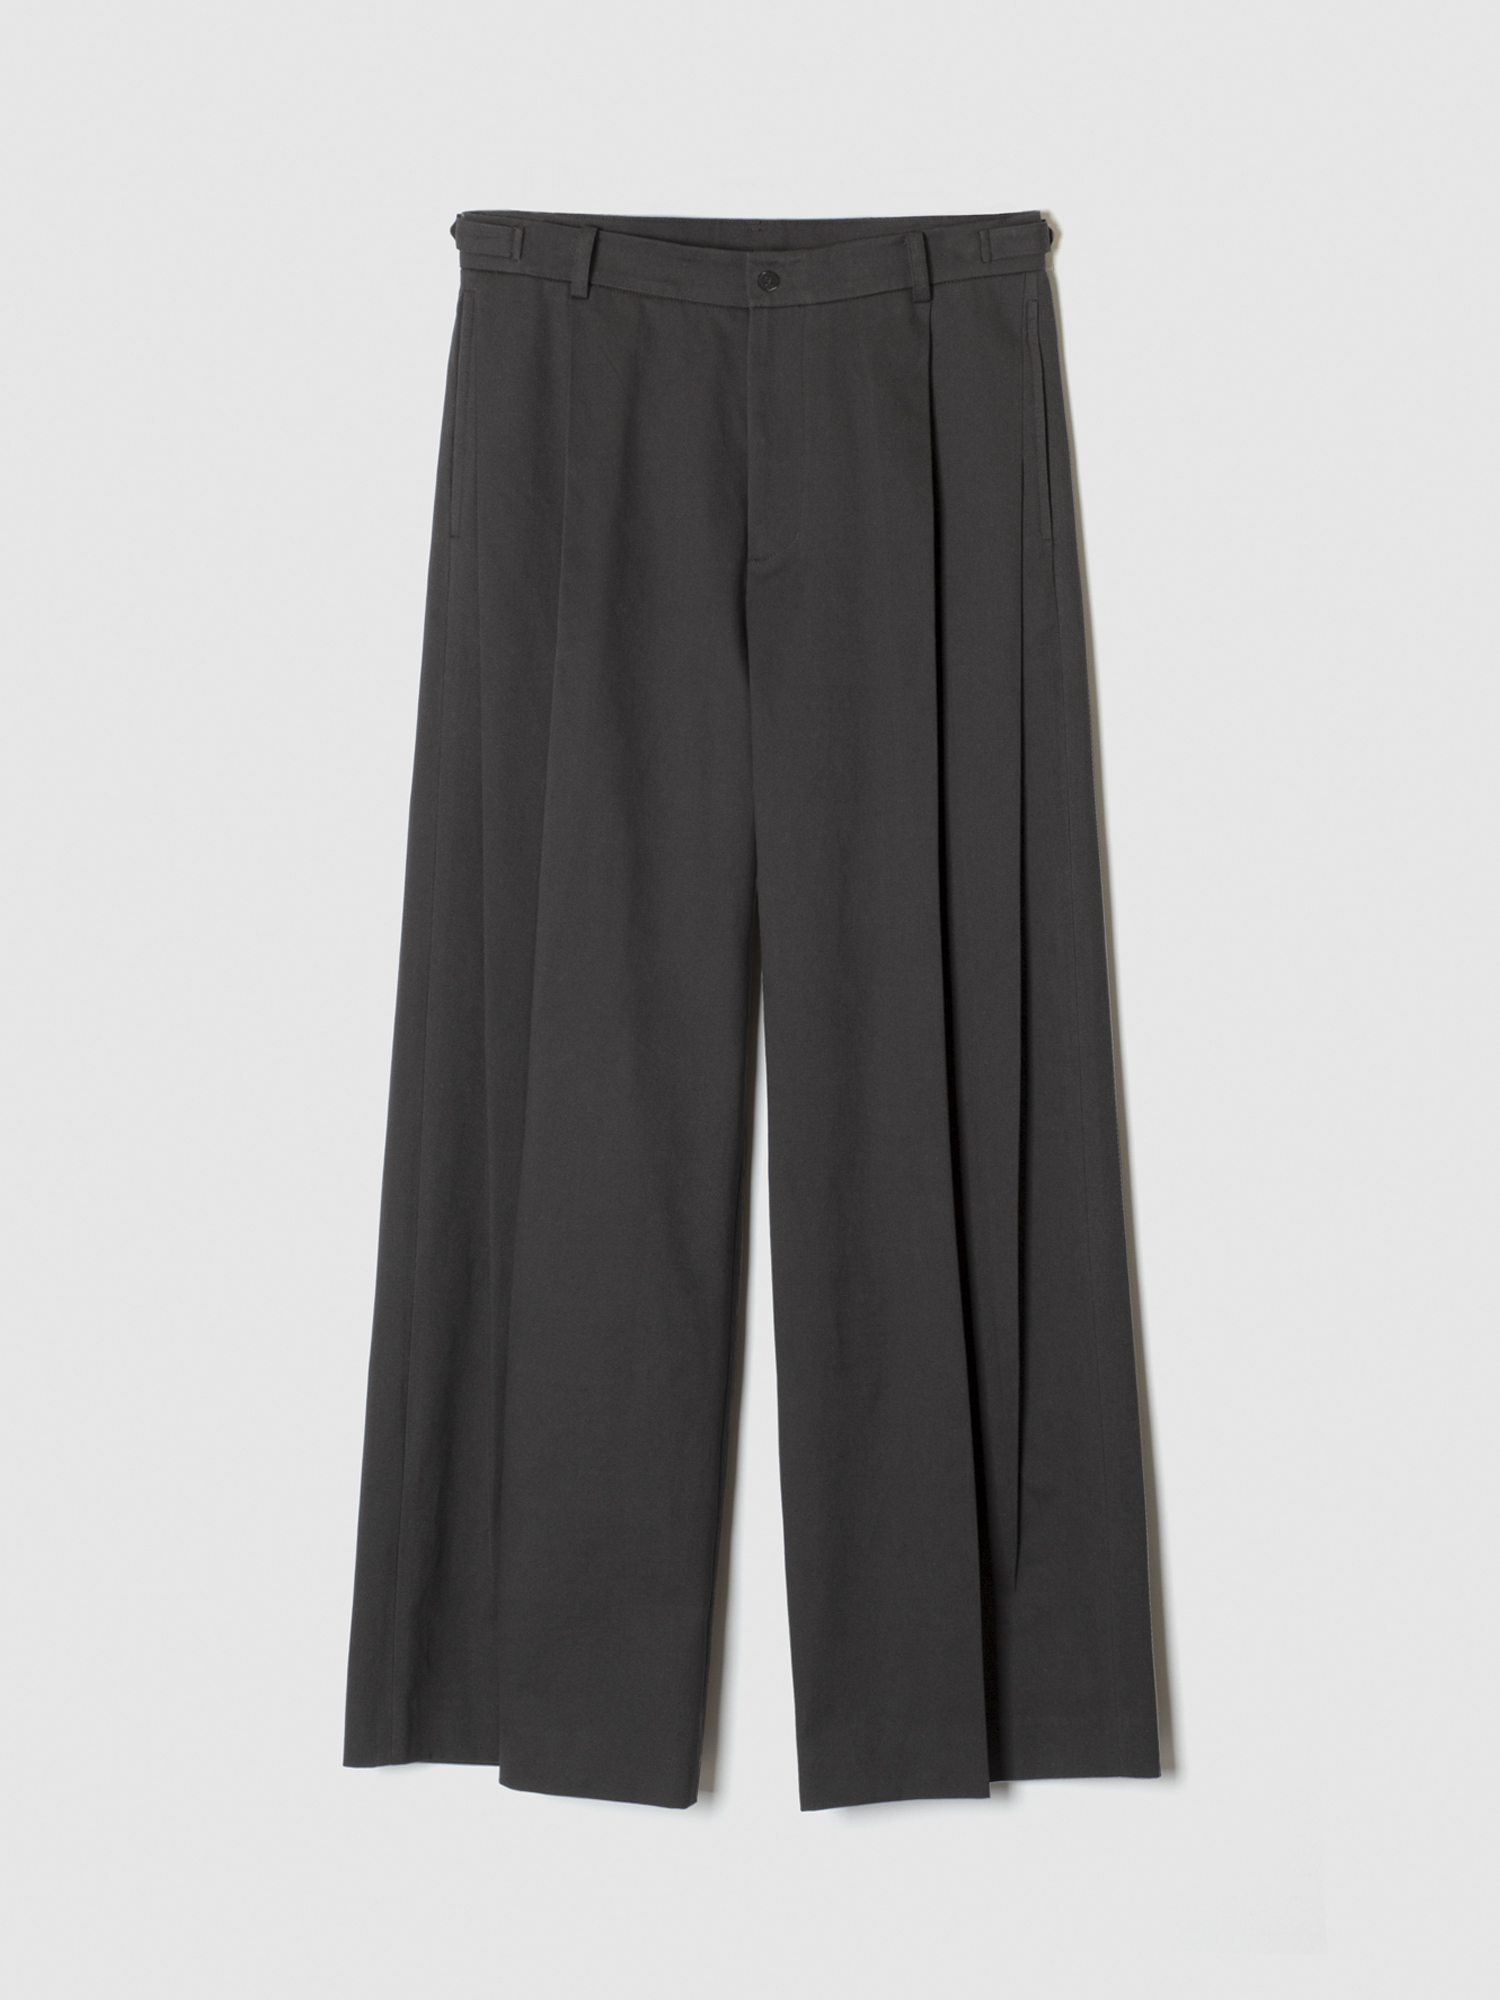 TWO PLEATED WIDE COTTON PANTS CHACOAL